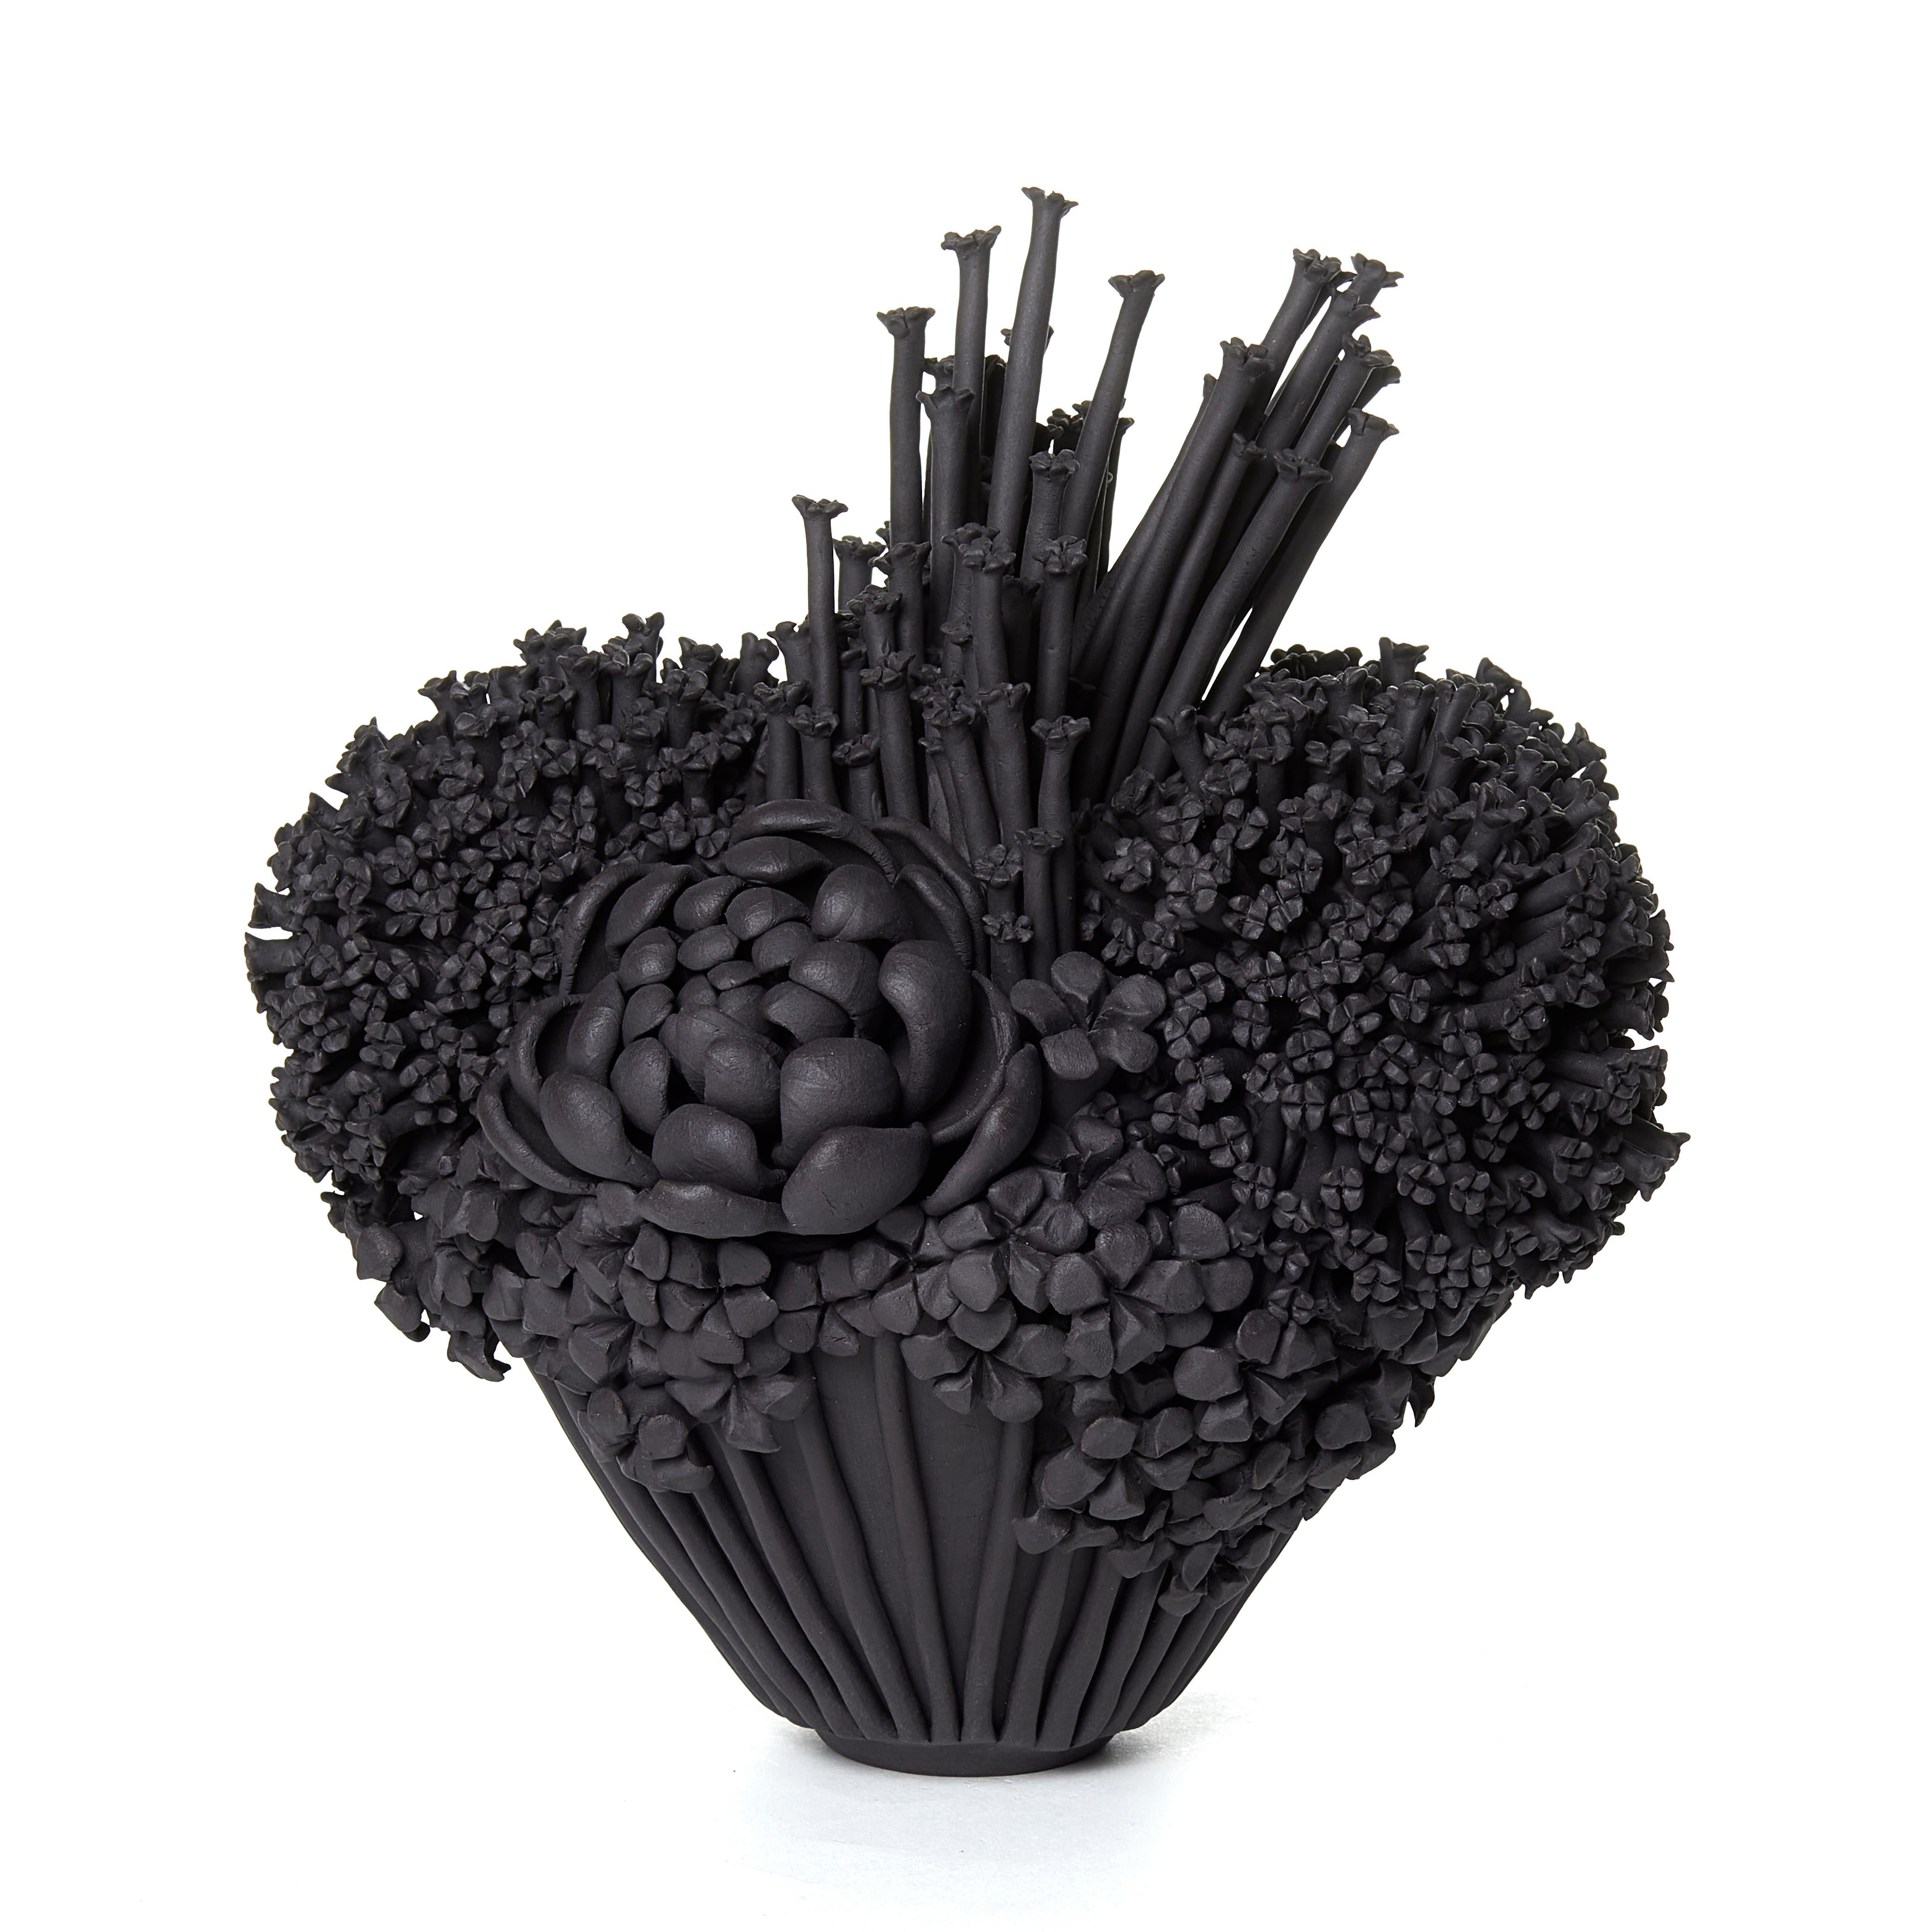 Black Efflorescence II is a unique hand-sculpted stoneware sculpture completely covered in a variety of flowers and blooms, each individually handmade by the British artist Vanessa Hogge.

Vanessa Hogge breathes life into her clay in the form of